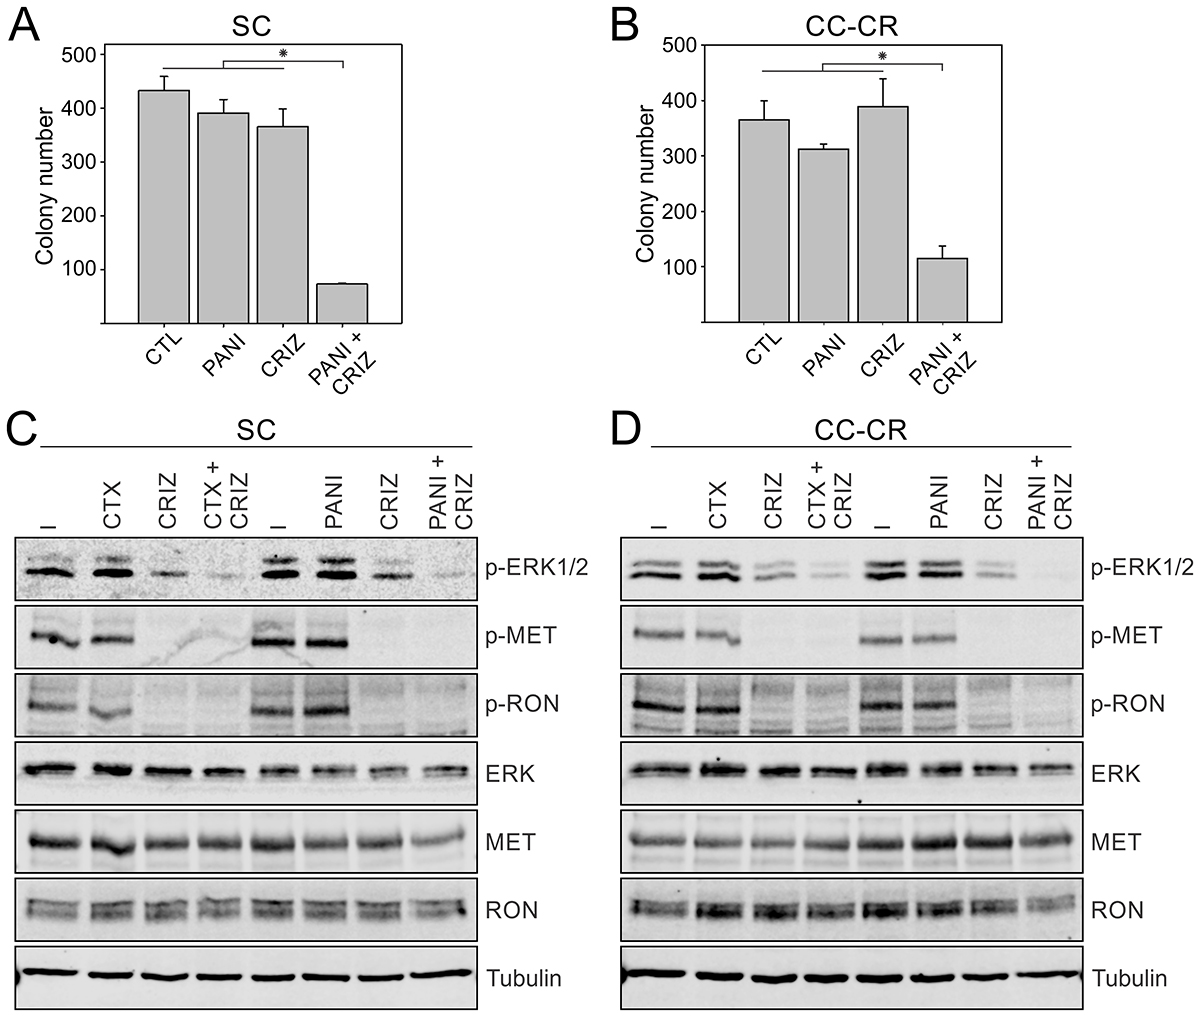 Overcoming panitumumab resistance in SC and CC-CR cells by crizotinib.